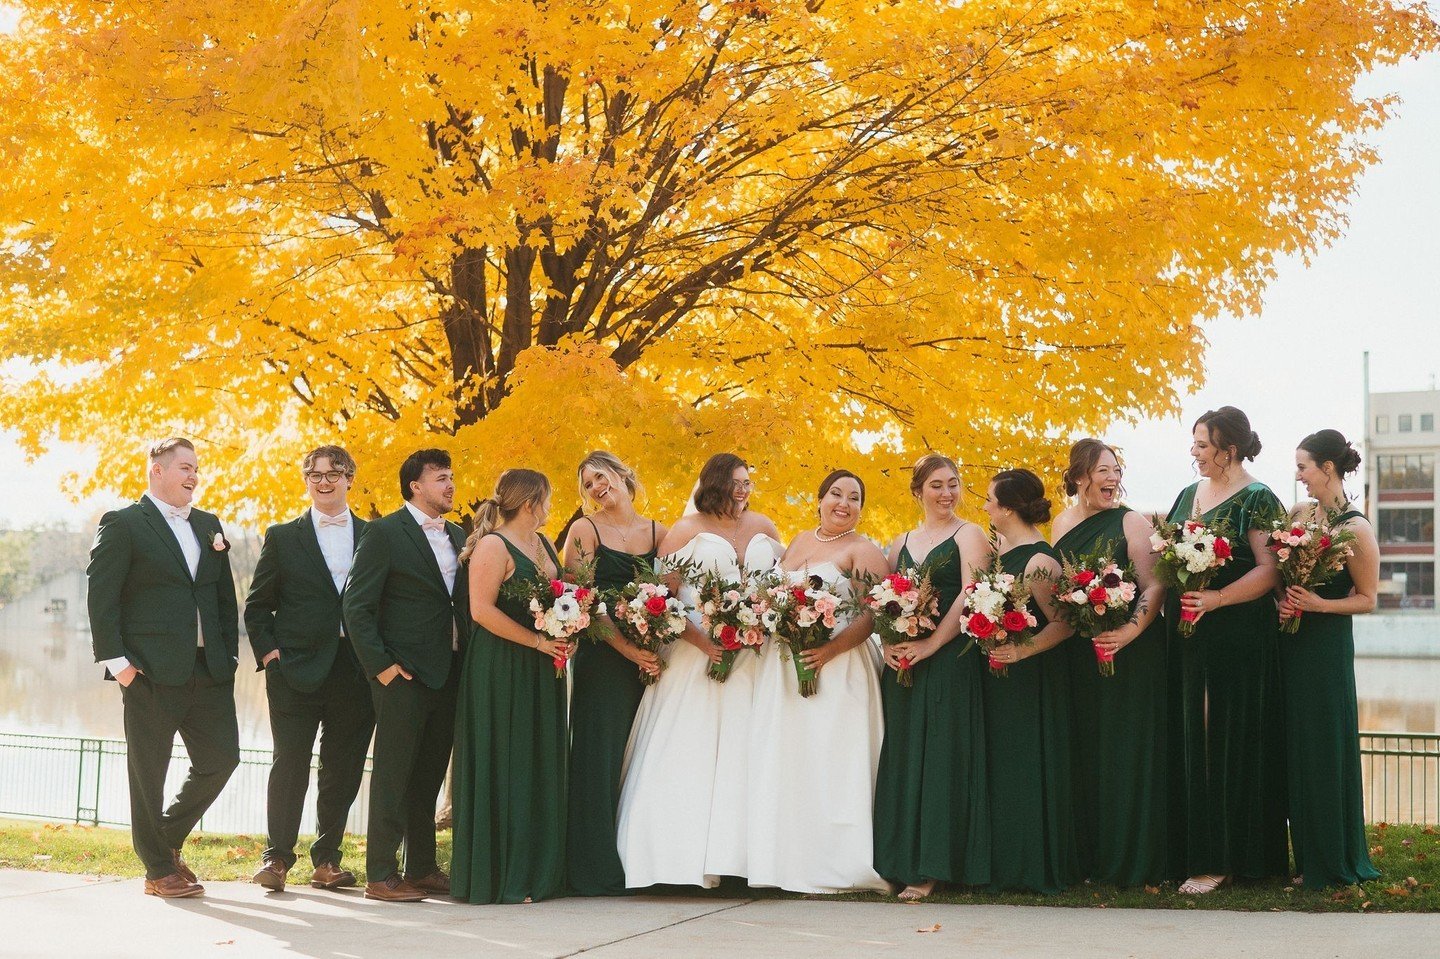 It may be spring, but we can't stop thinking about the gorgeous fall wedding in Grand Rapids last year! Many of our weddings take us to the lakeshore, but we absolutely love Grand Rapids weddings. There are so many amazing locations for photos all ar